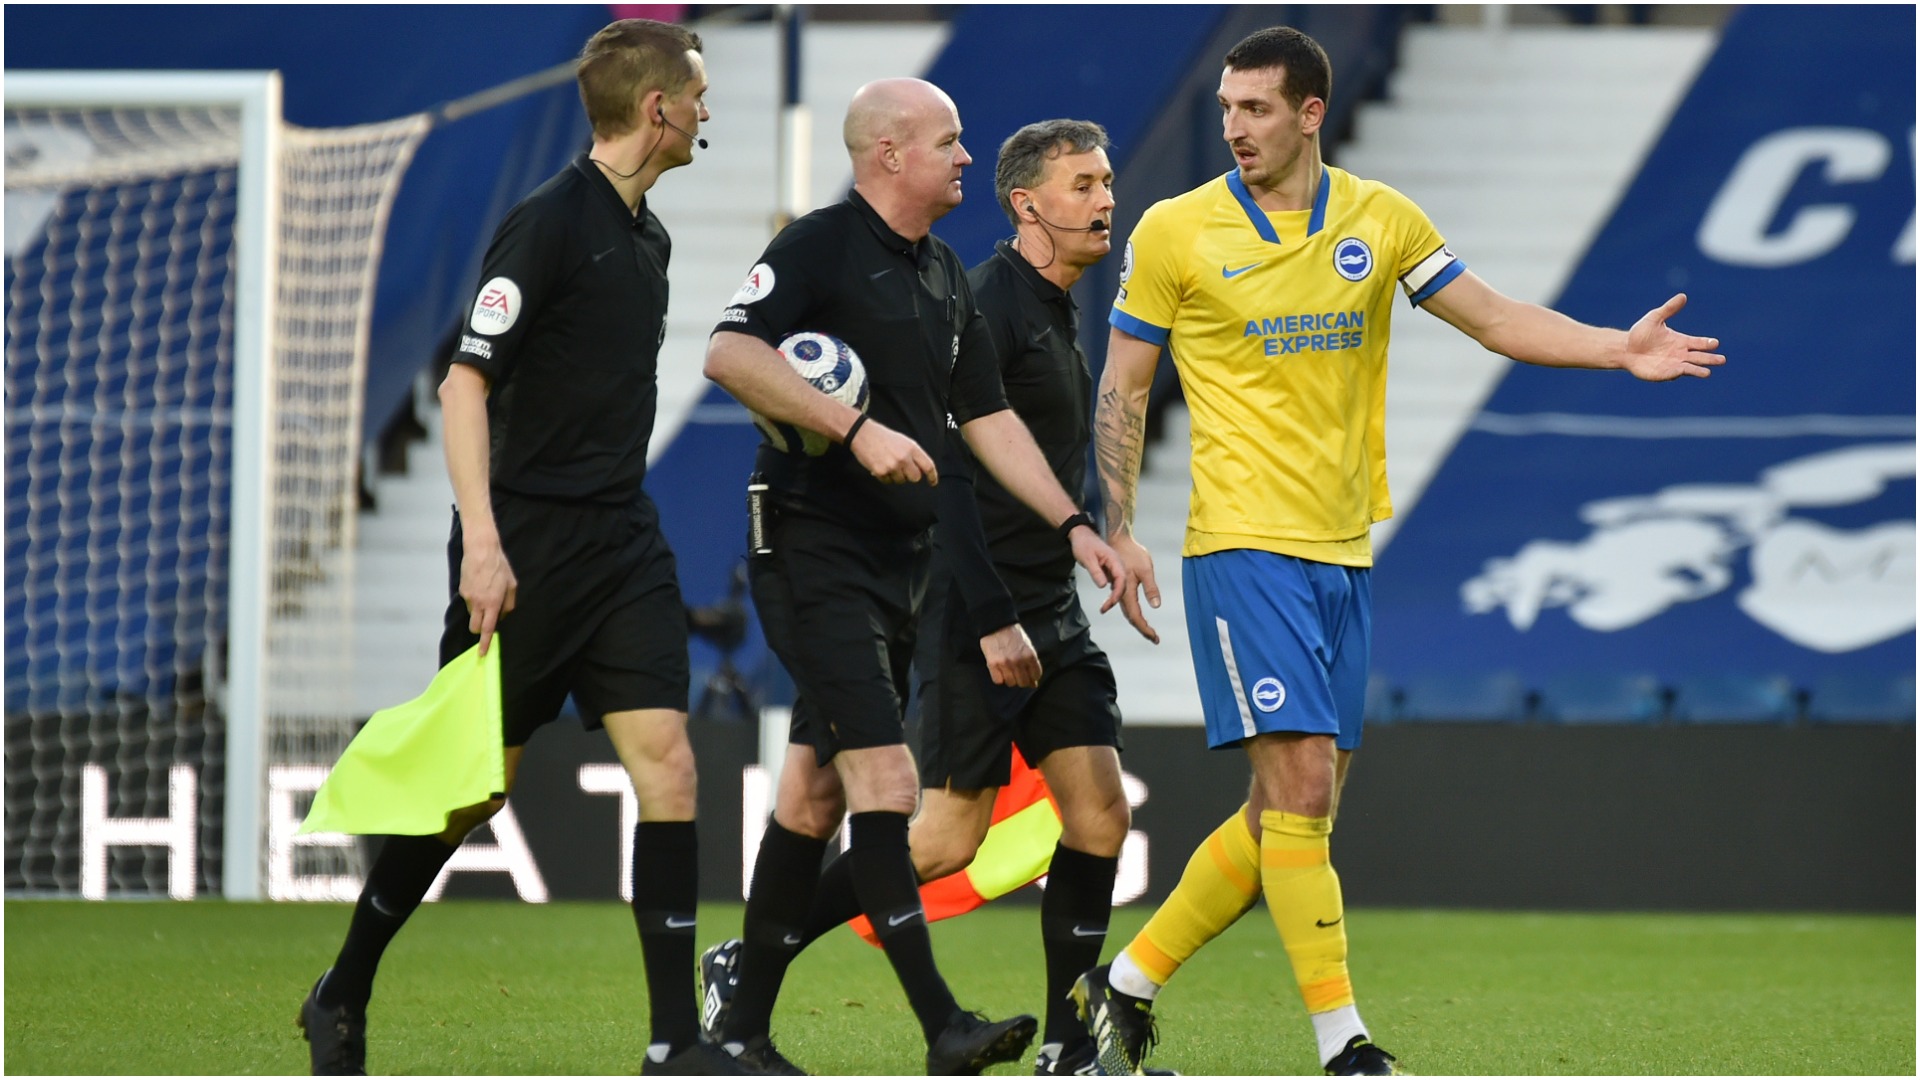 Brighton hurt by 'horrendous decision' as they pay the penalty at West Brom